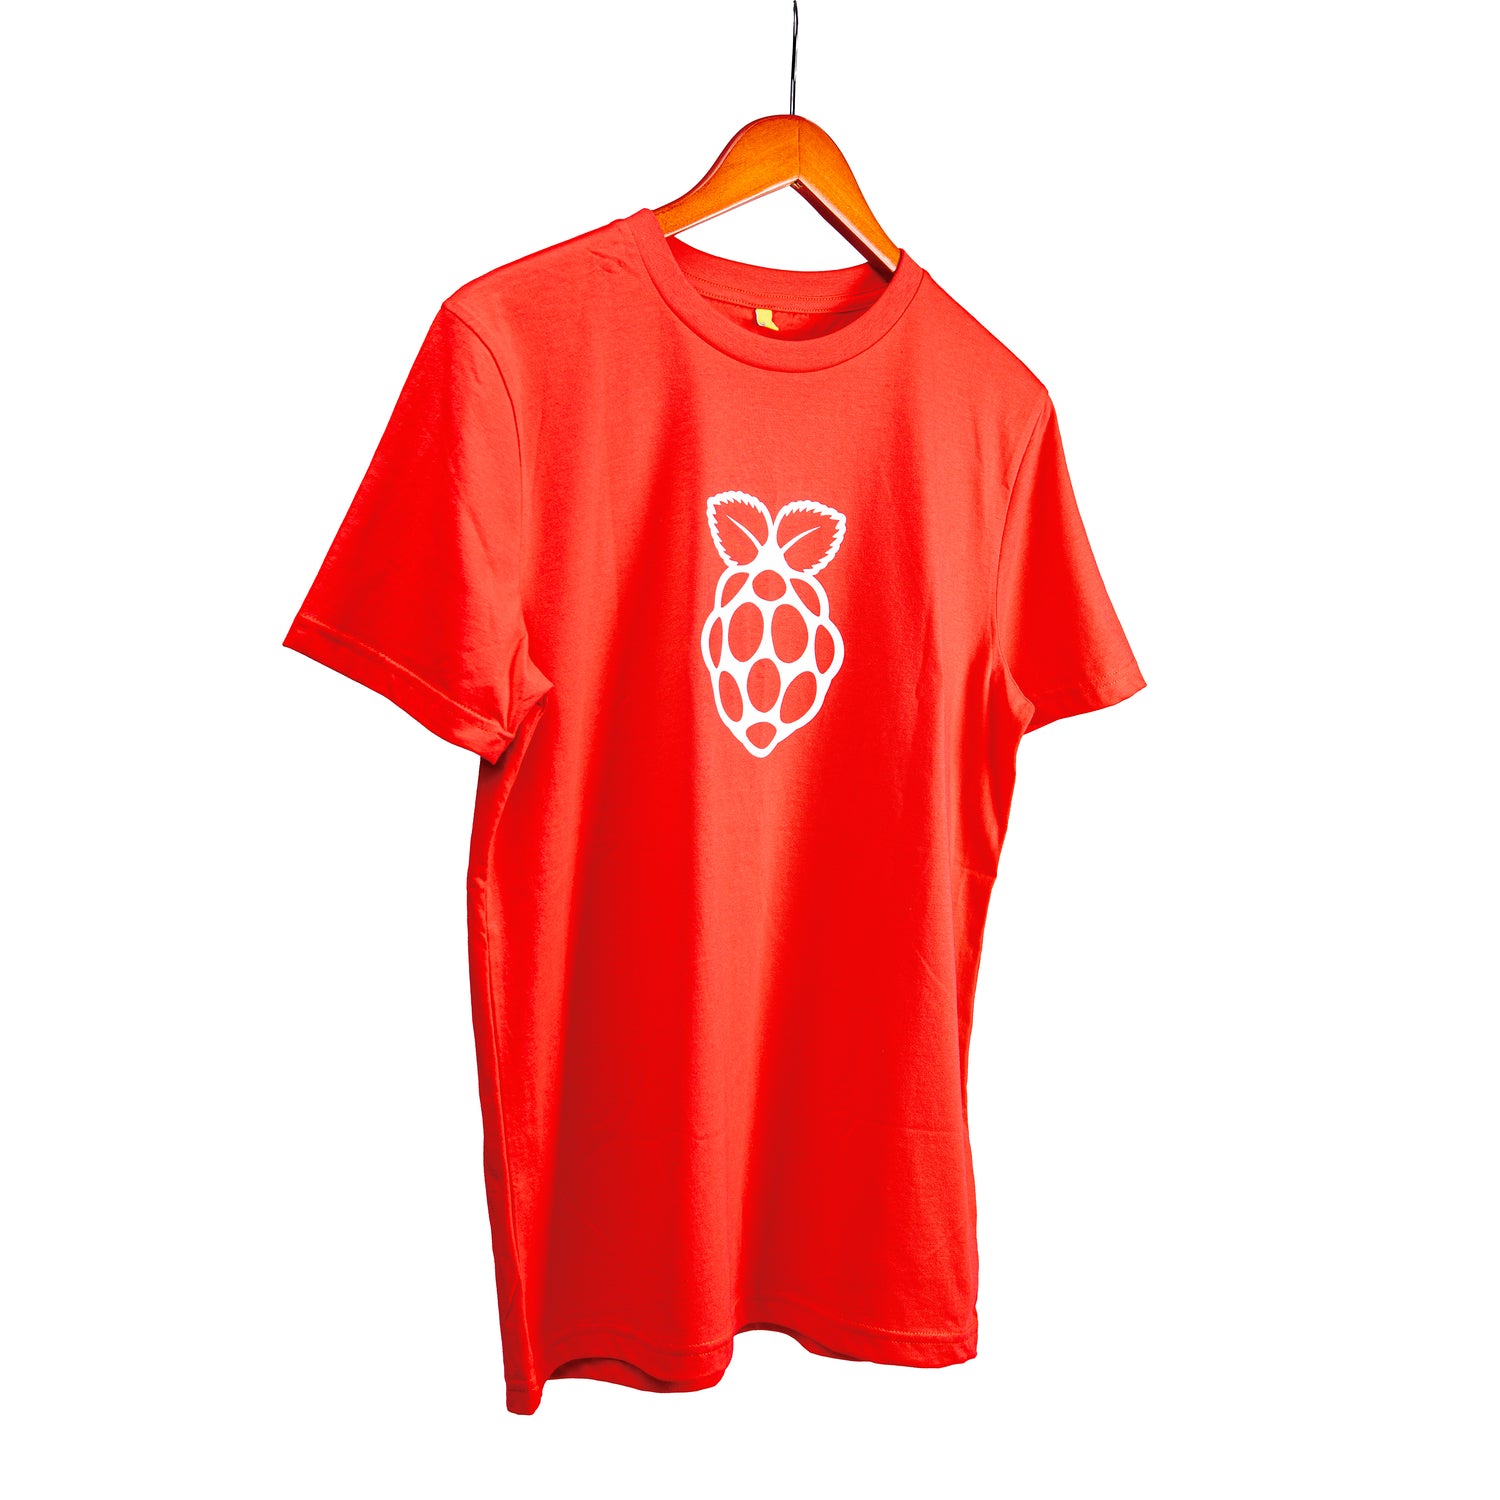 Raspberry Pi Adult Size Small